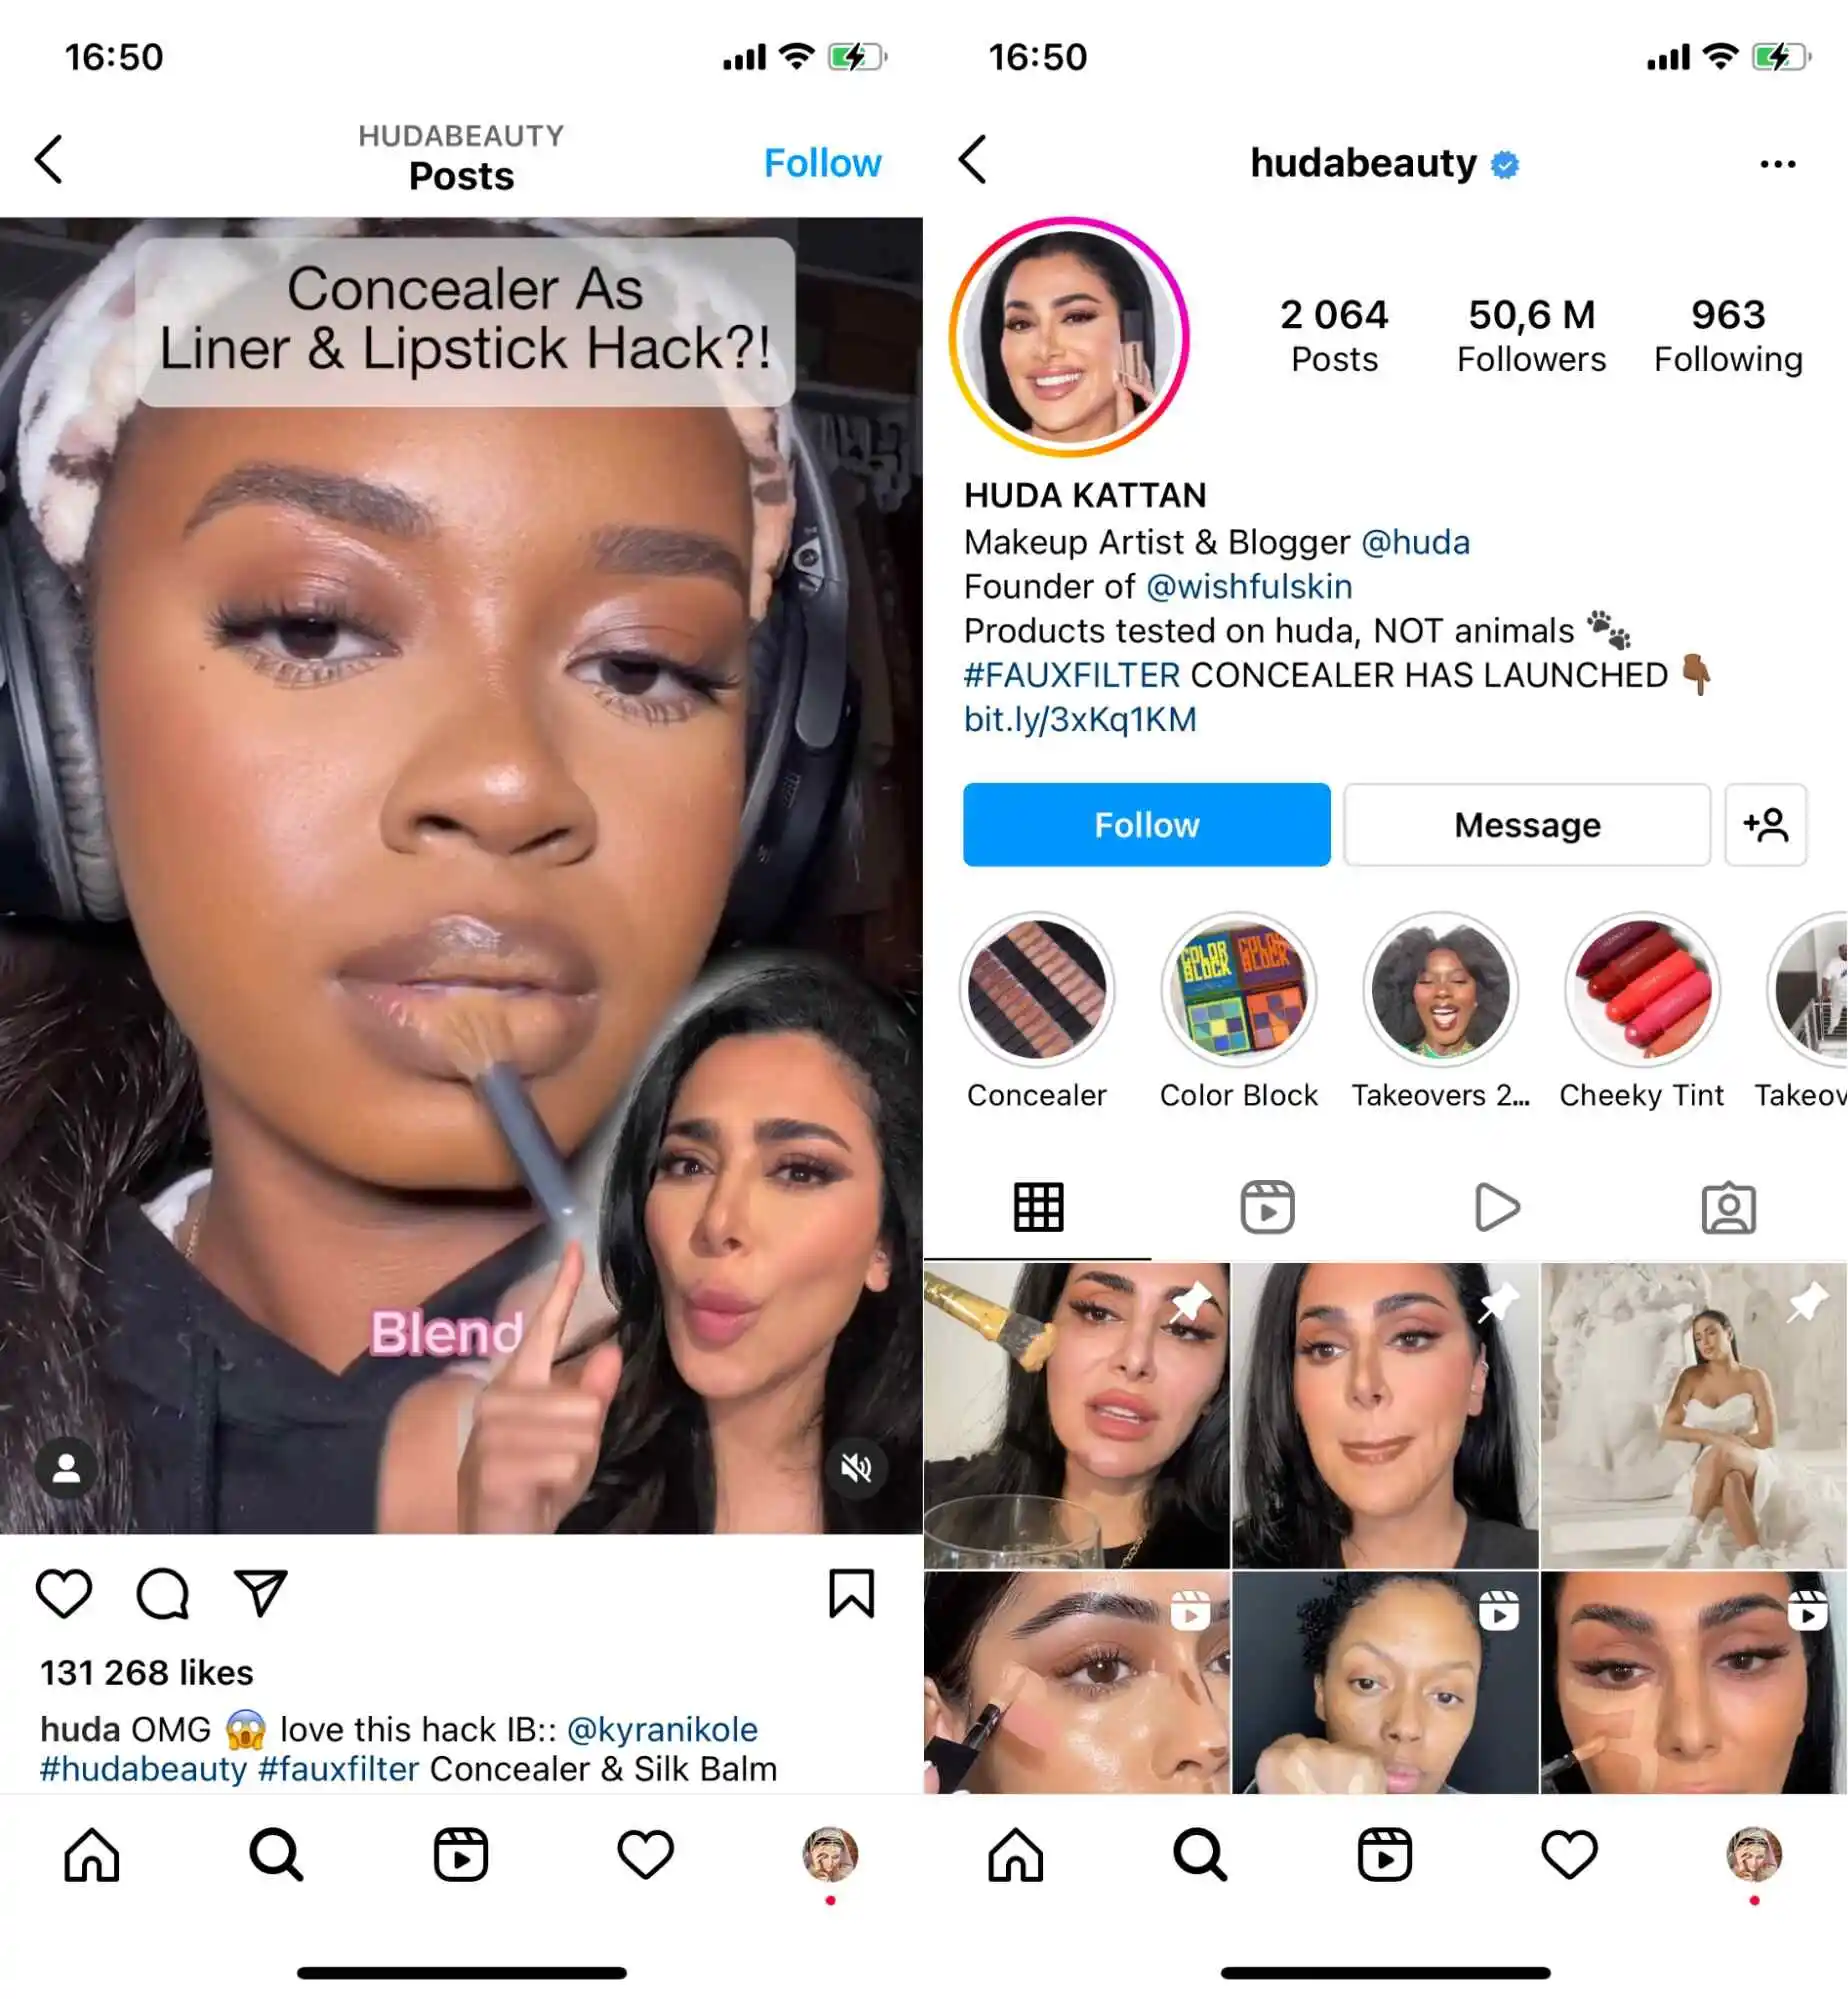 Instagram page of Huda Beauty